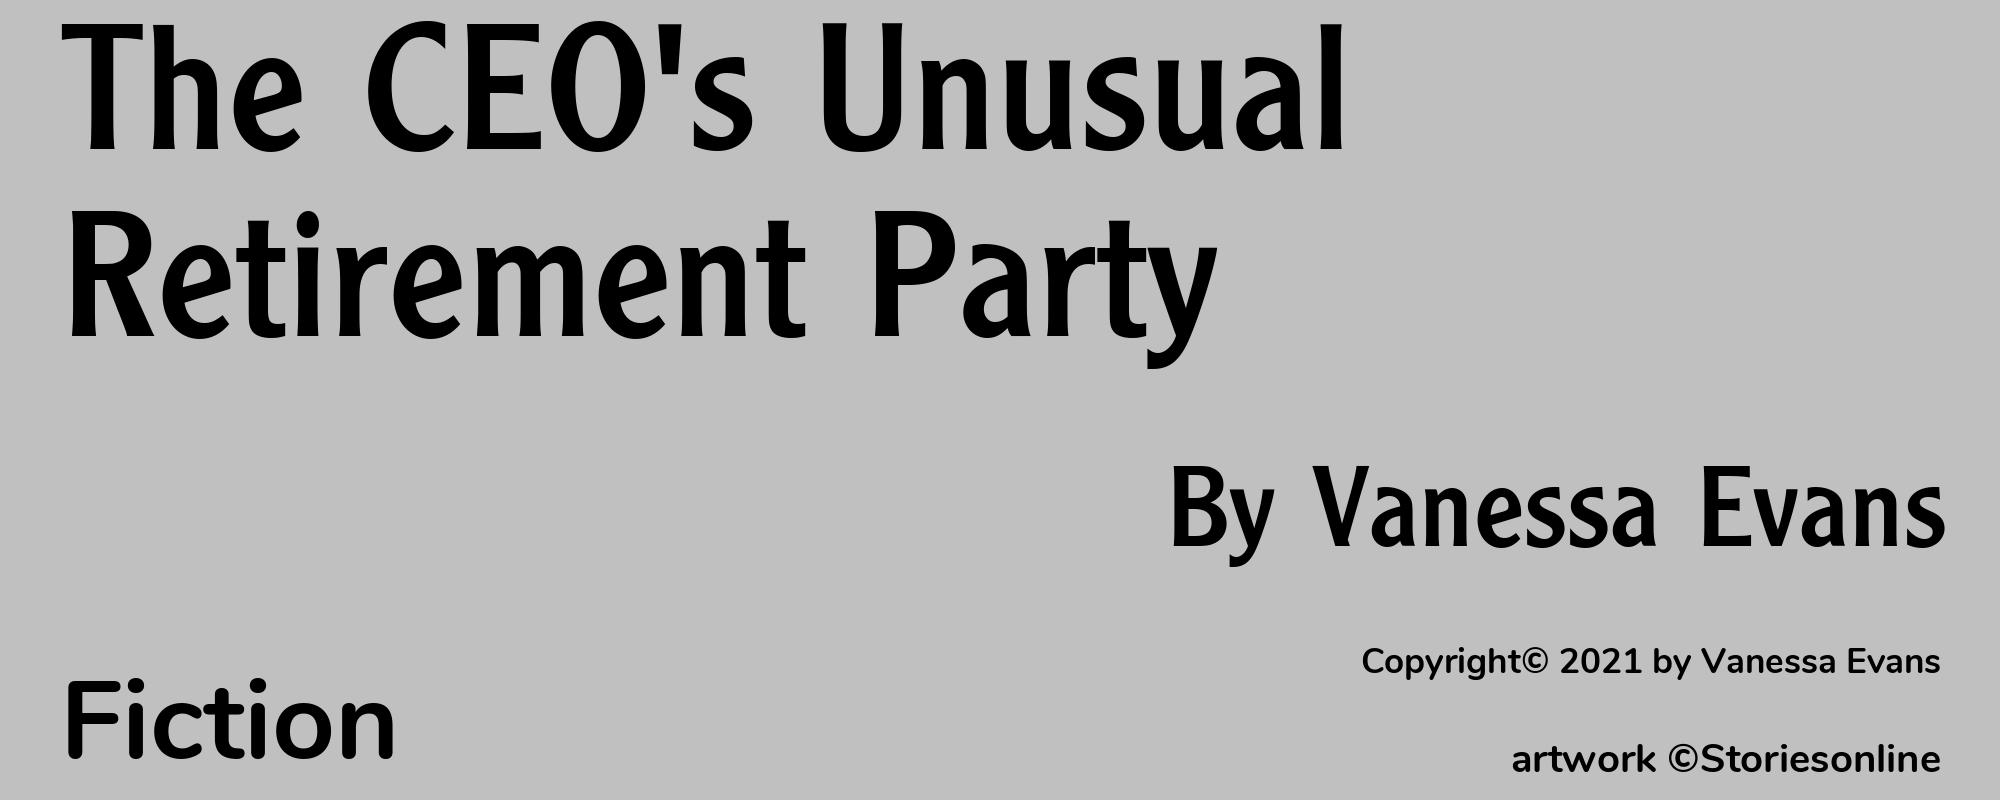 The CEO's Unusual Retirement Party - Cover